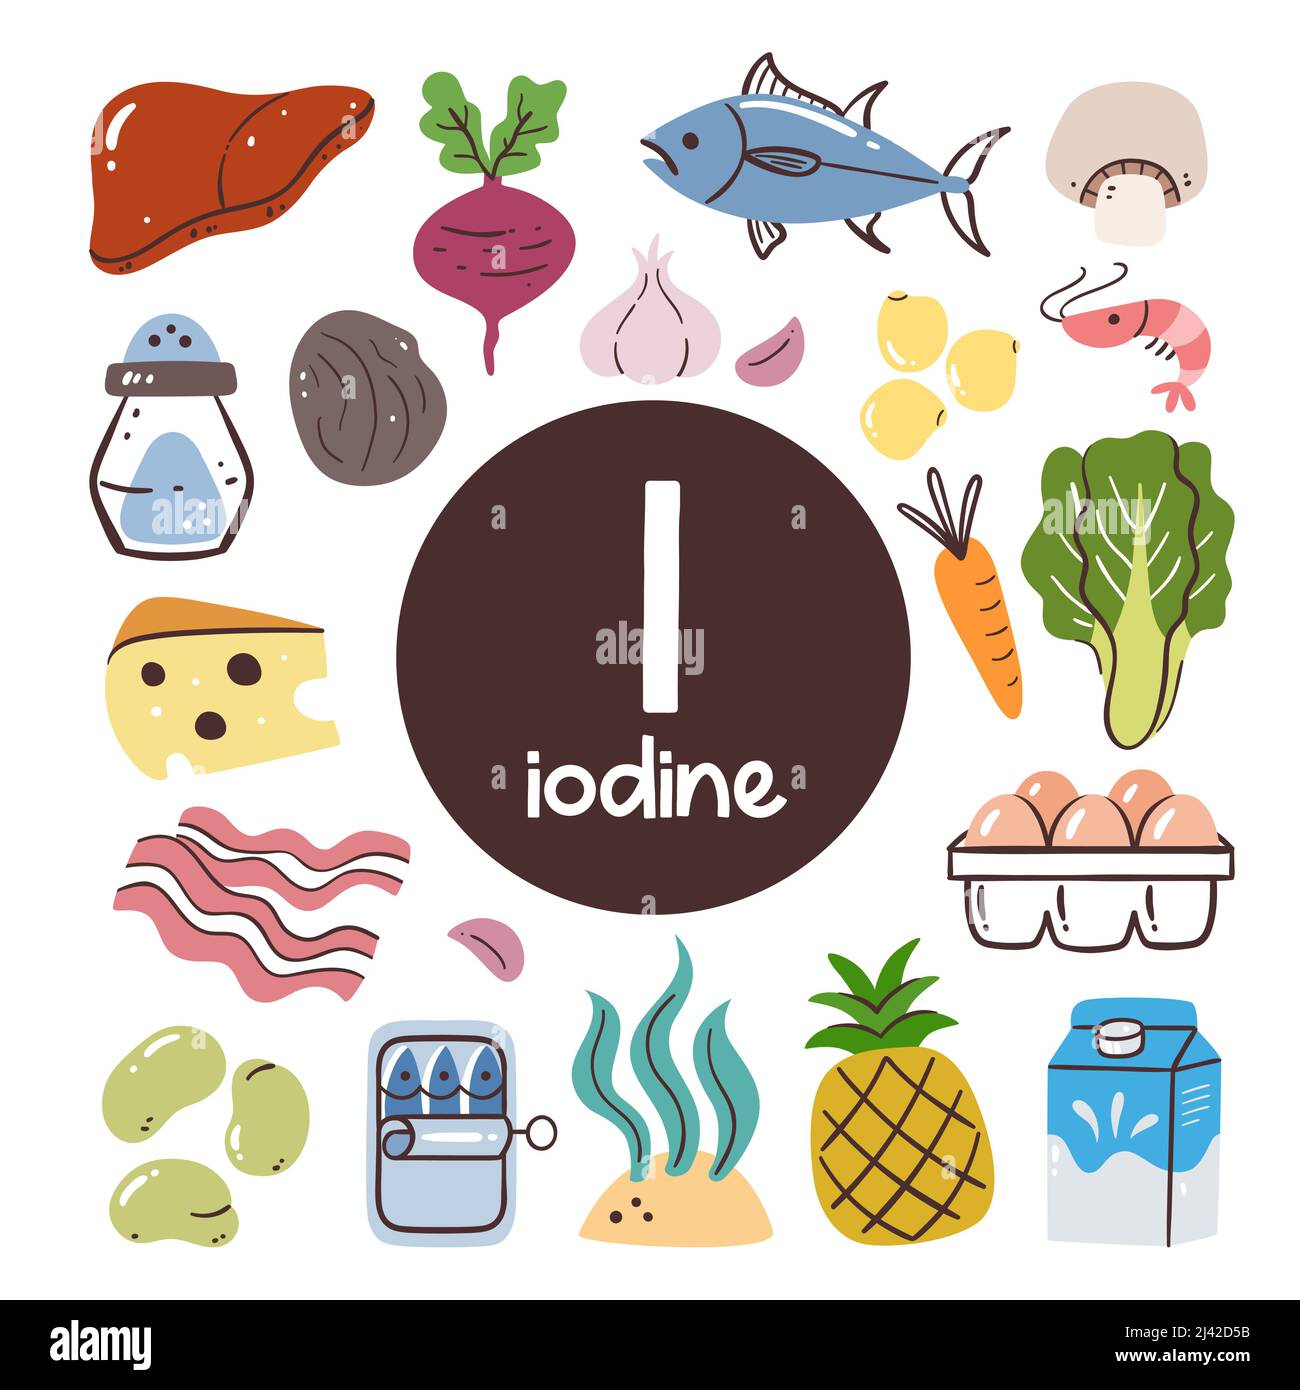 Food products with high level of Iodine. Cooking ingredients. Fruits, vegetables, legumes, dairy, meat, seafood. Stock Vector